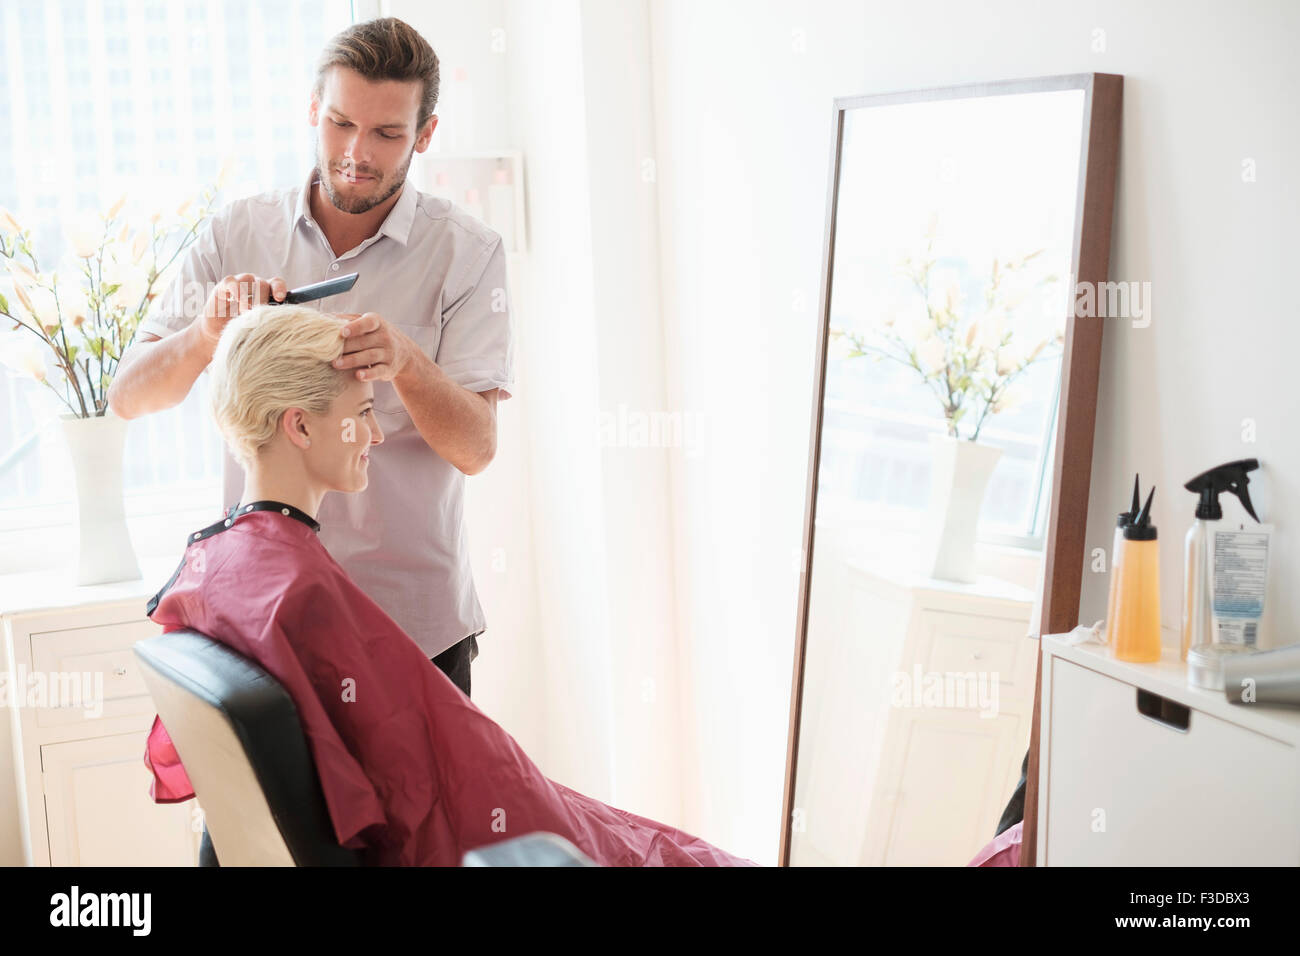 Hairdresser combing woman's hair Stock Photo